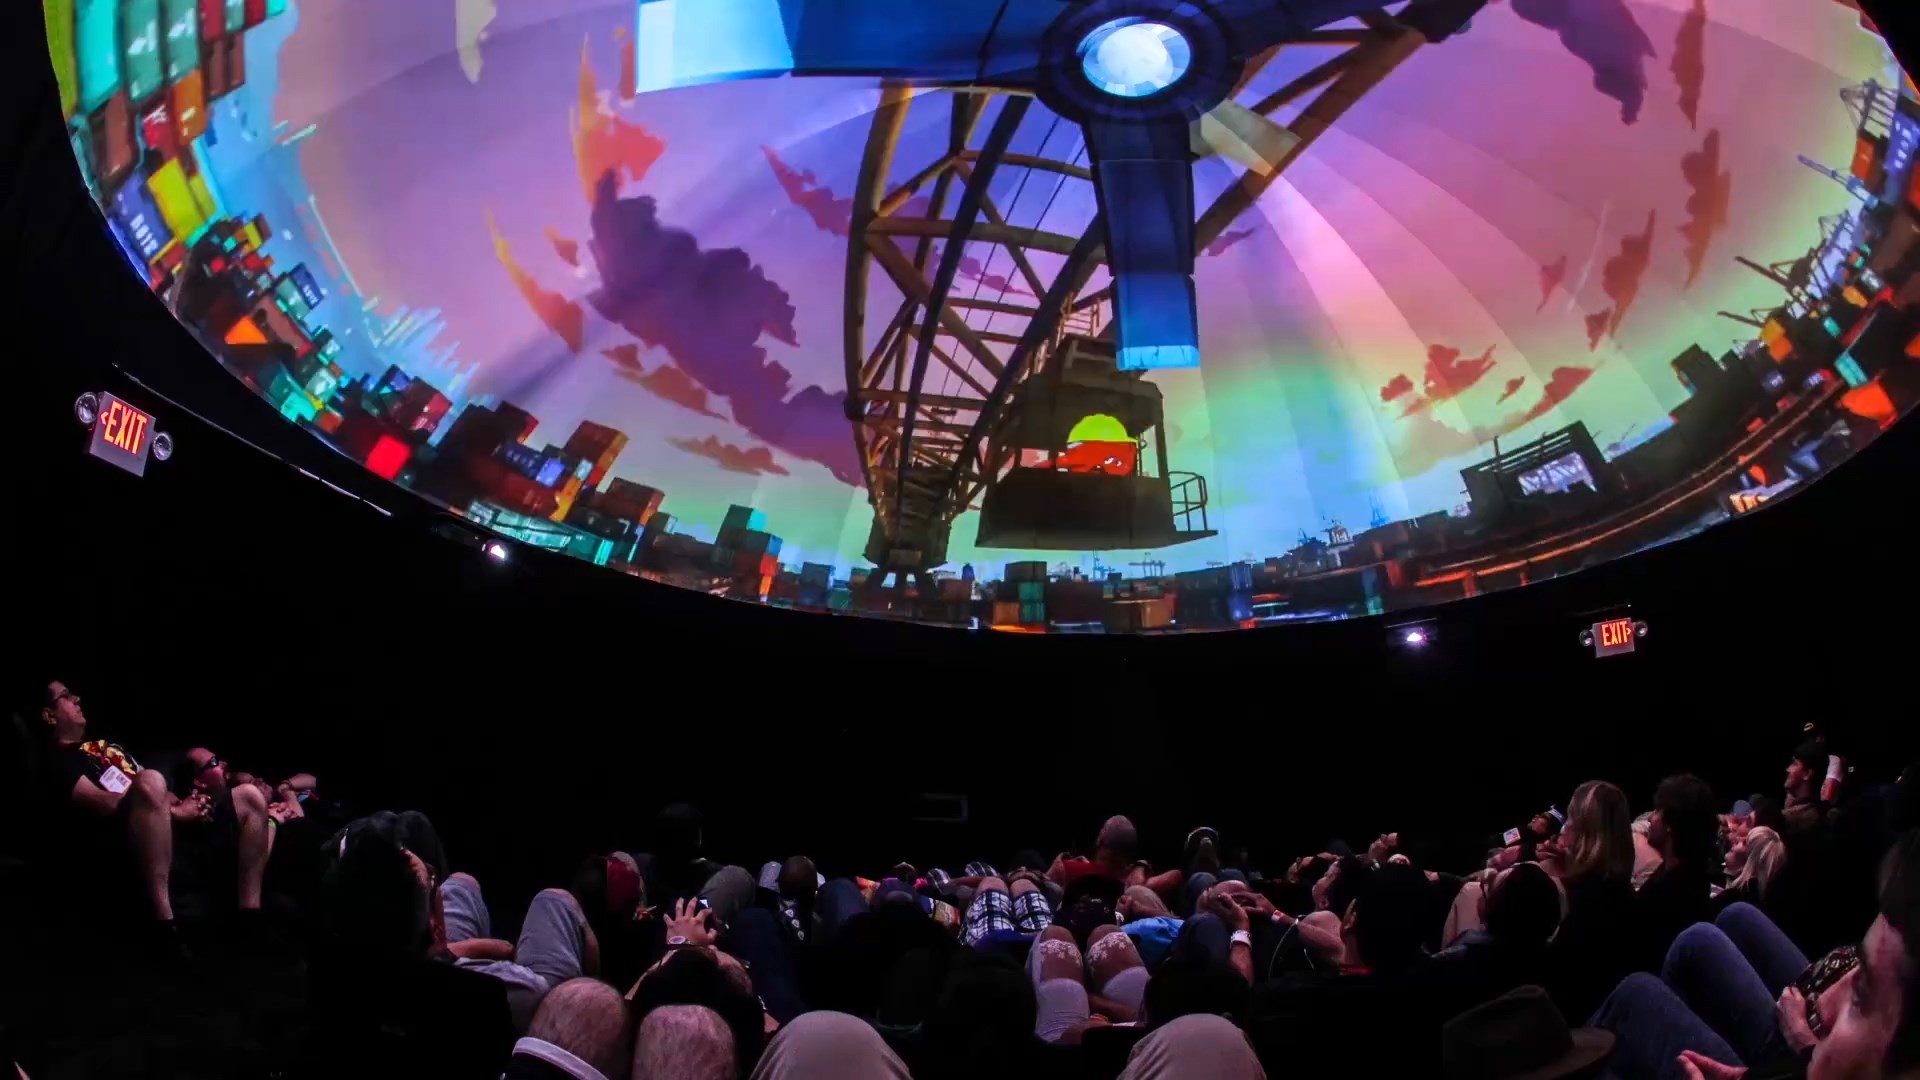 Projection Dome Theater by Pacific Domes at Comic-Con